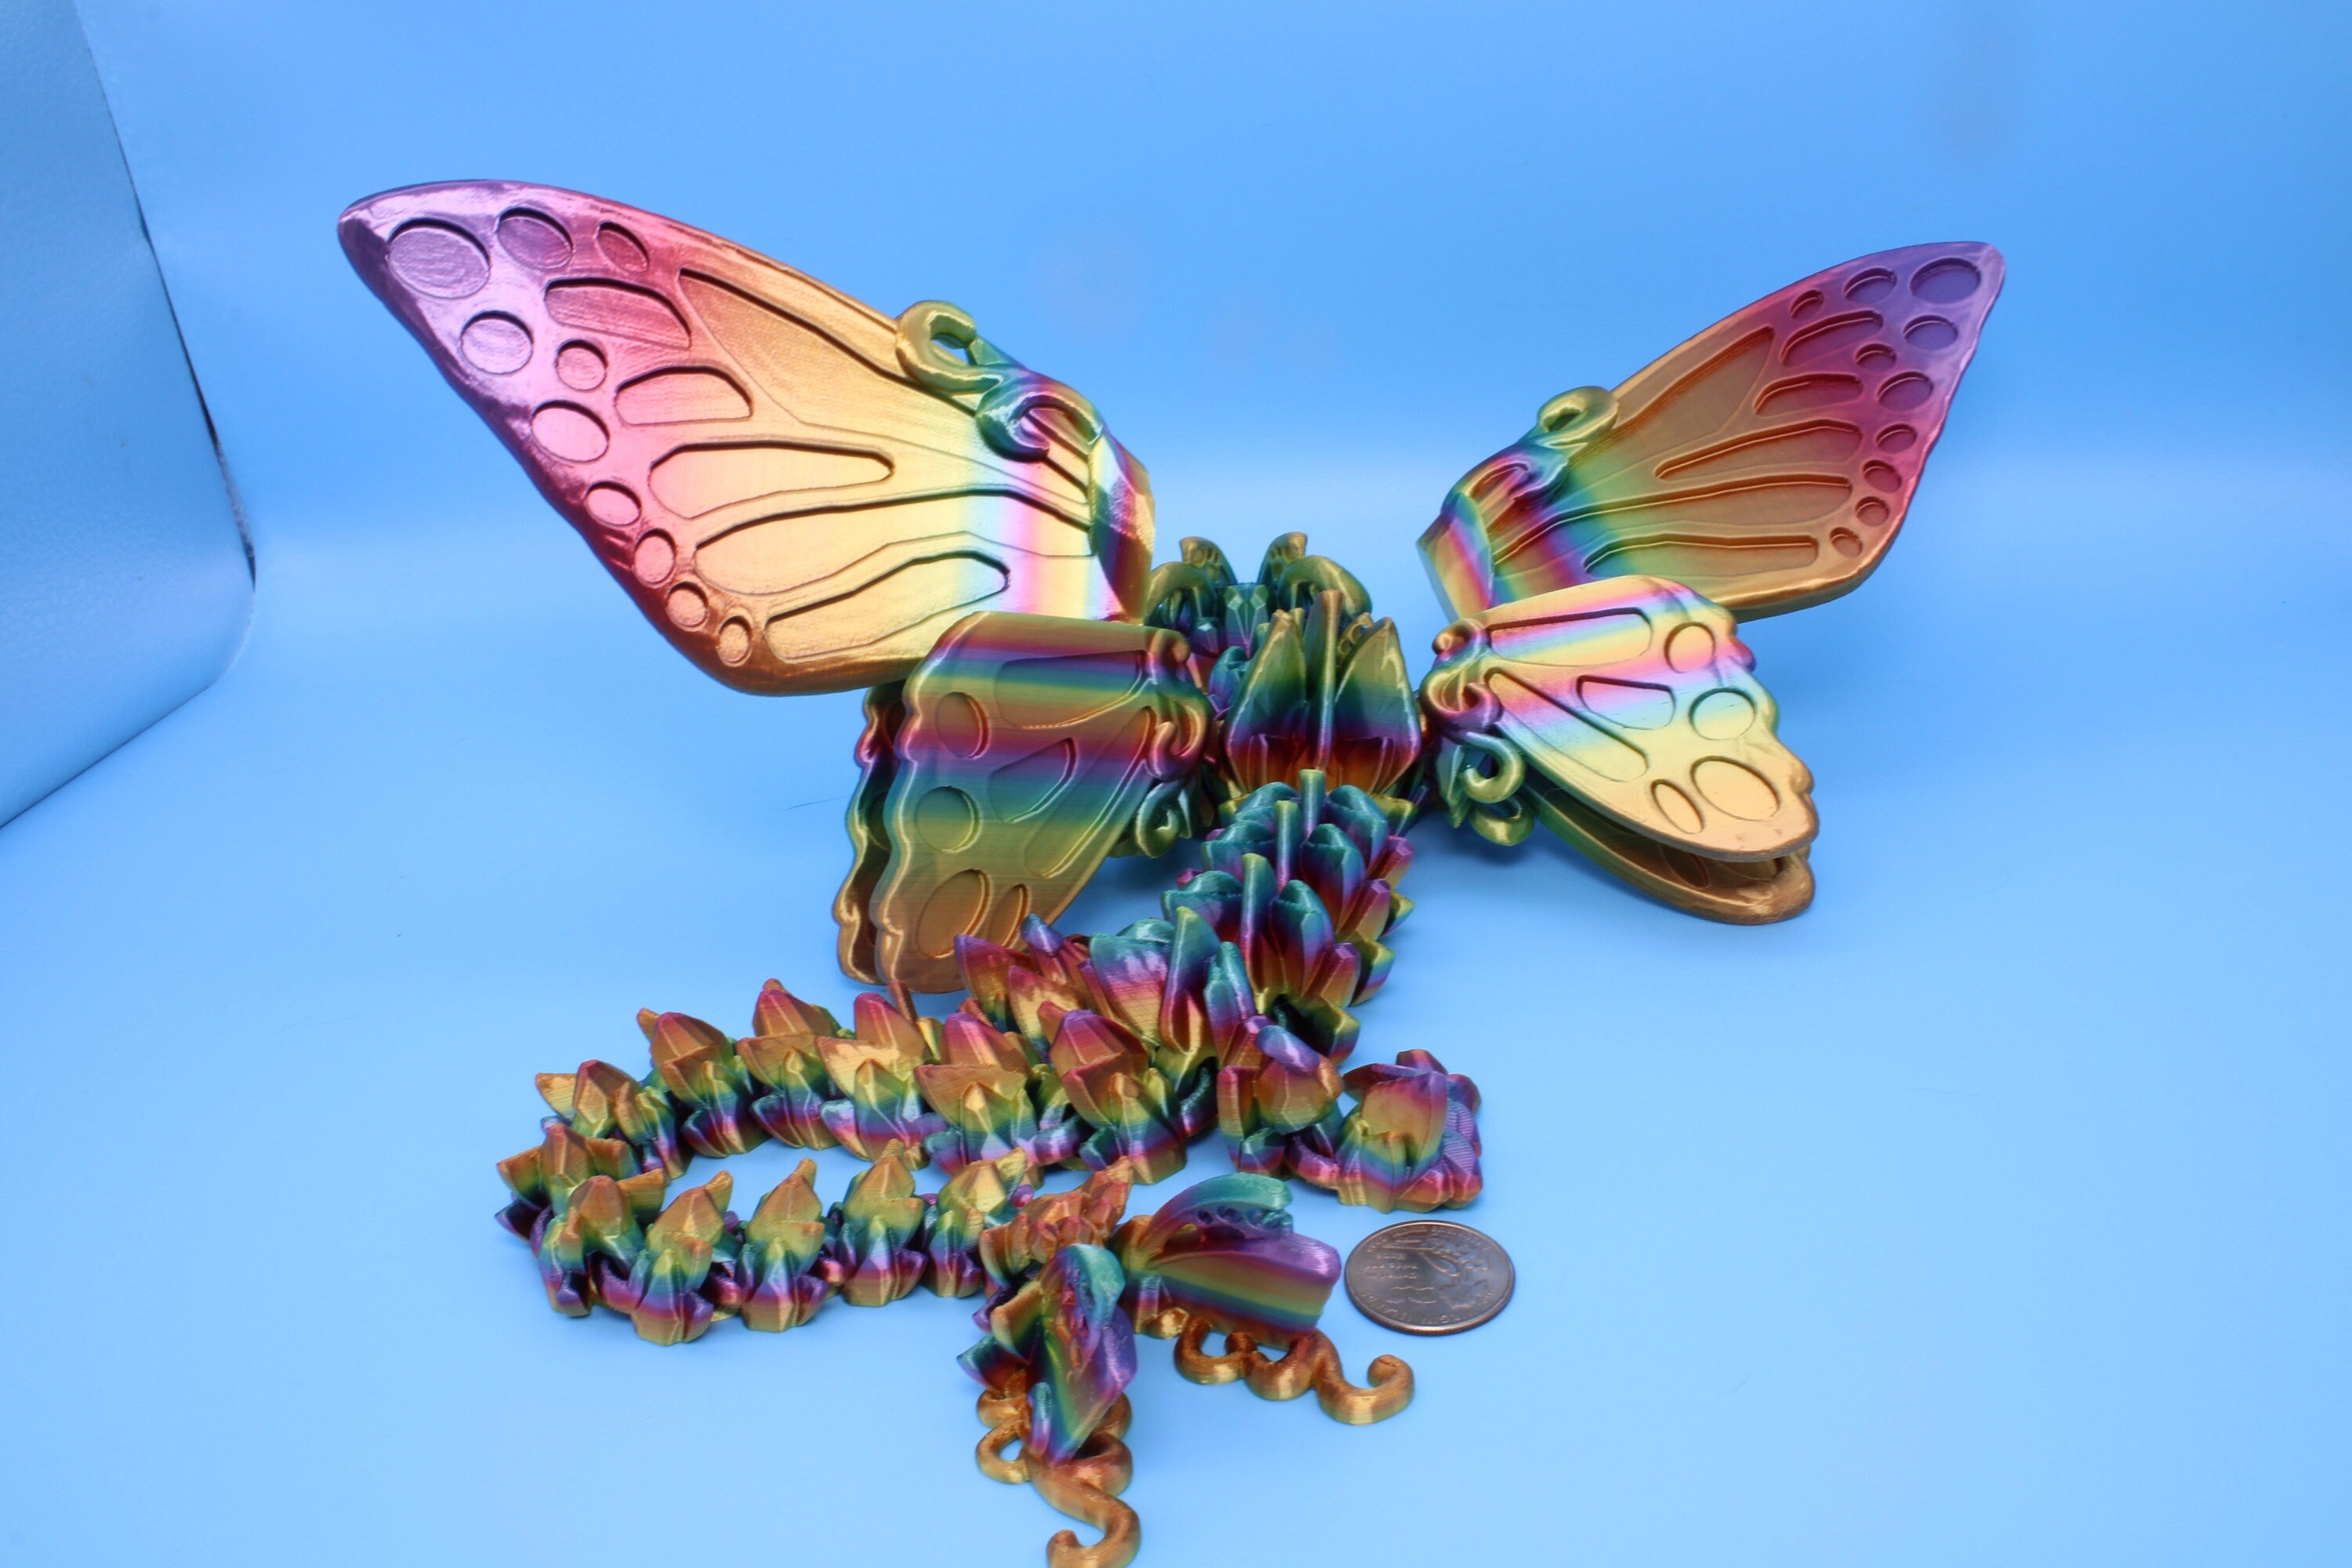 Butterfly Wing Dragon | Rainbow | Butterfly Wing Dragon | 3D printed | Articulating Dragon | Fidget Toy | Flexi Toy | 18 in